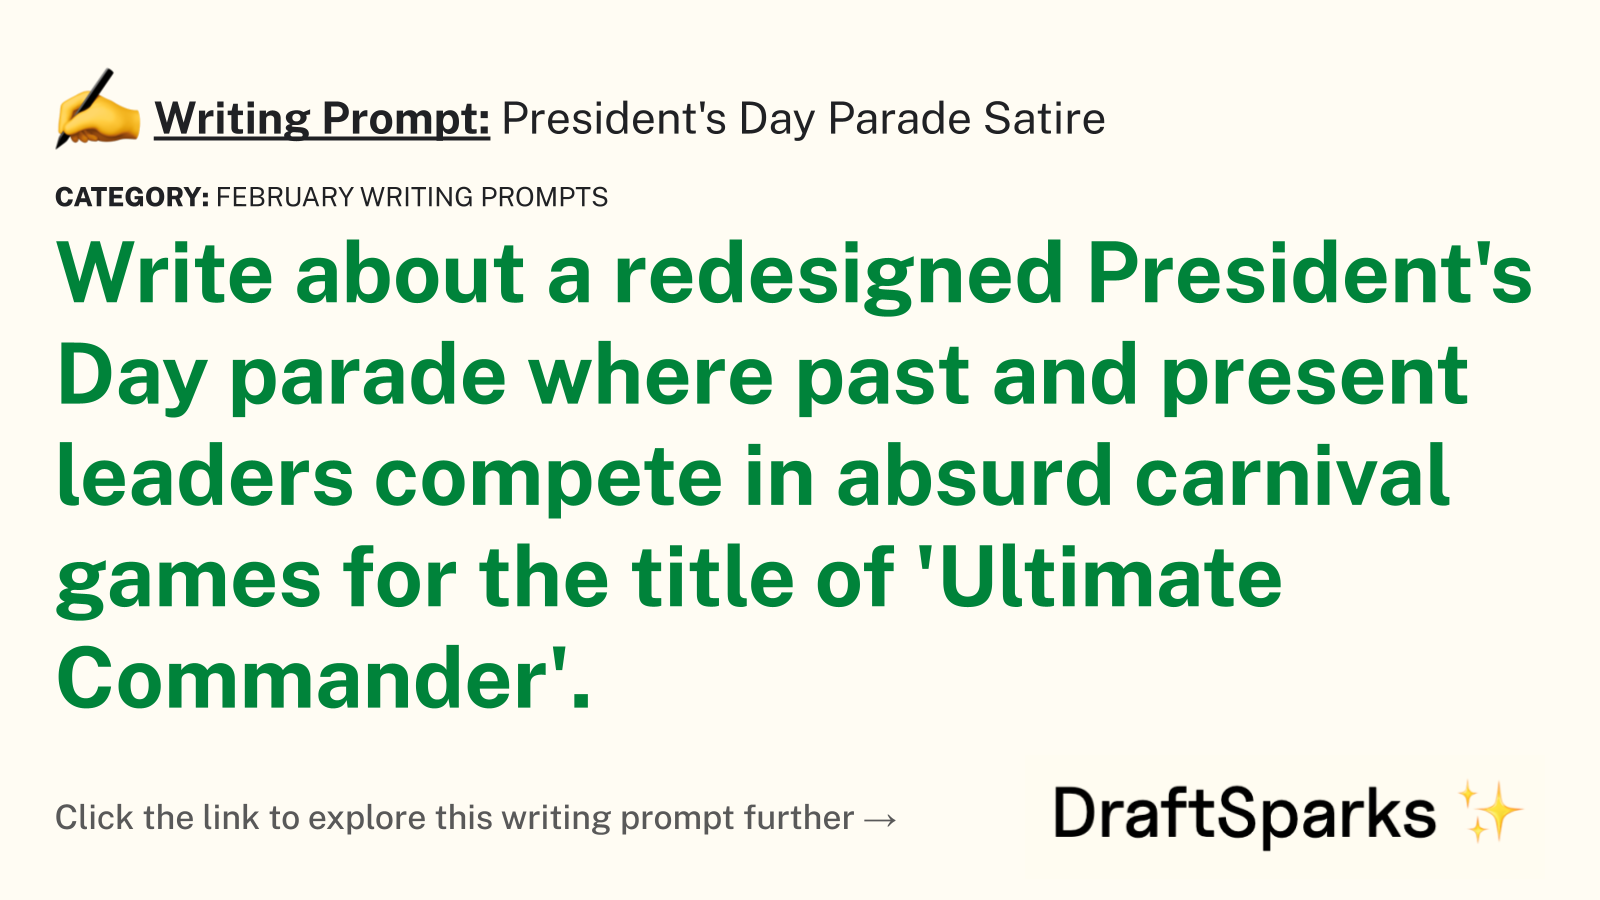 President’s Day Parade Satire